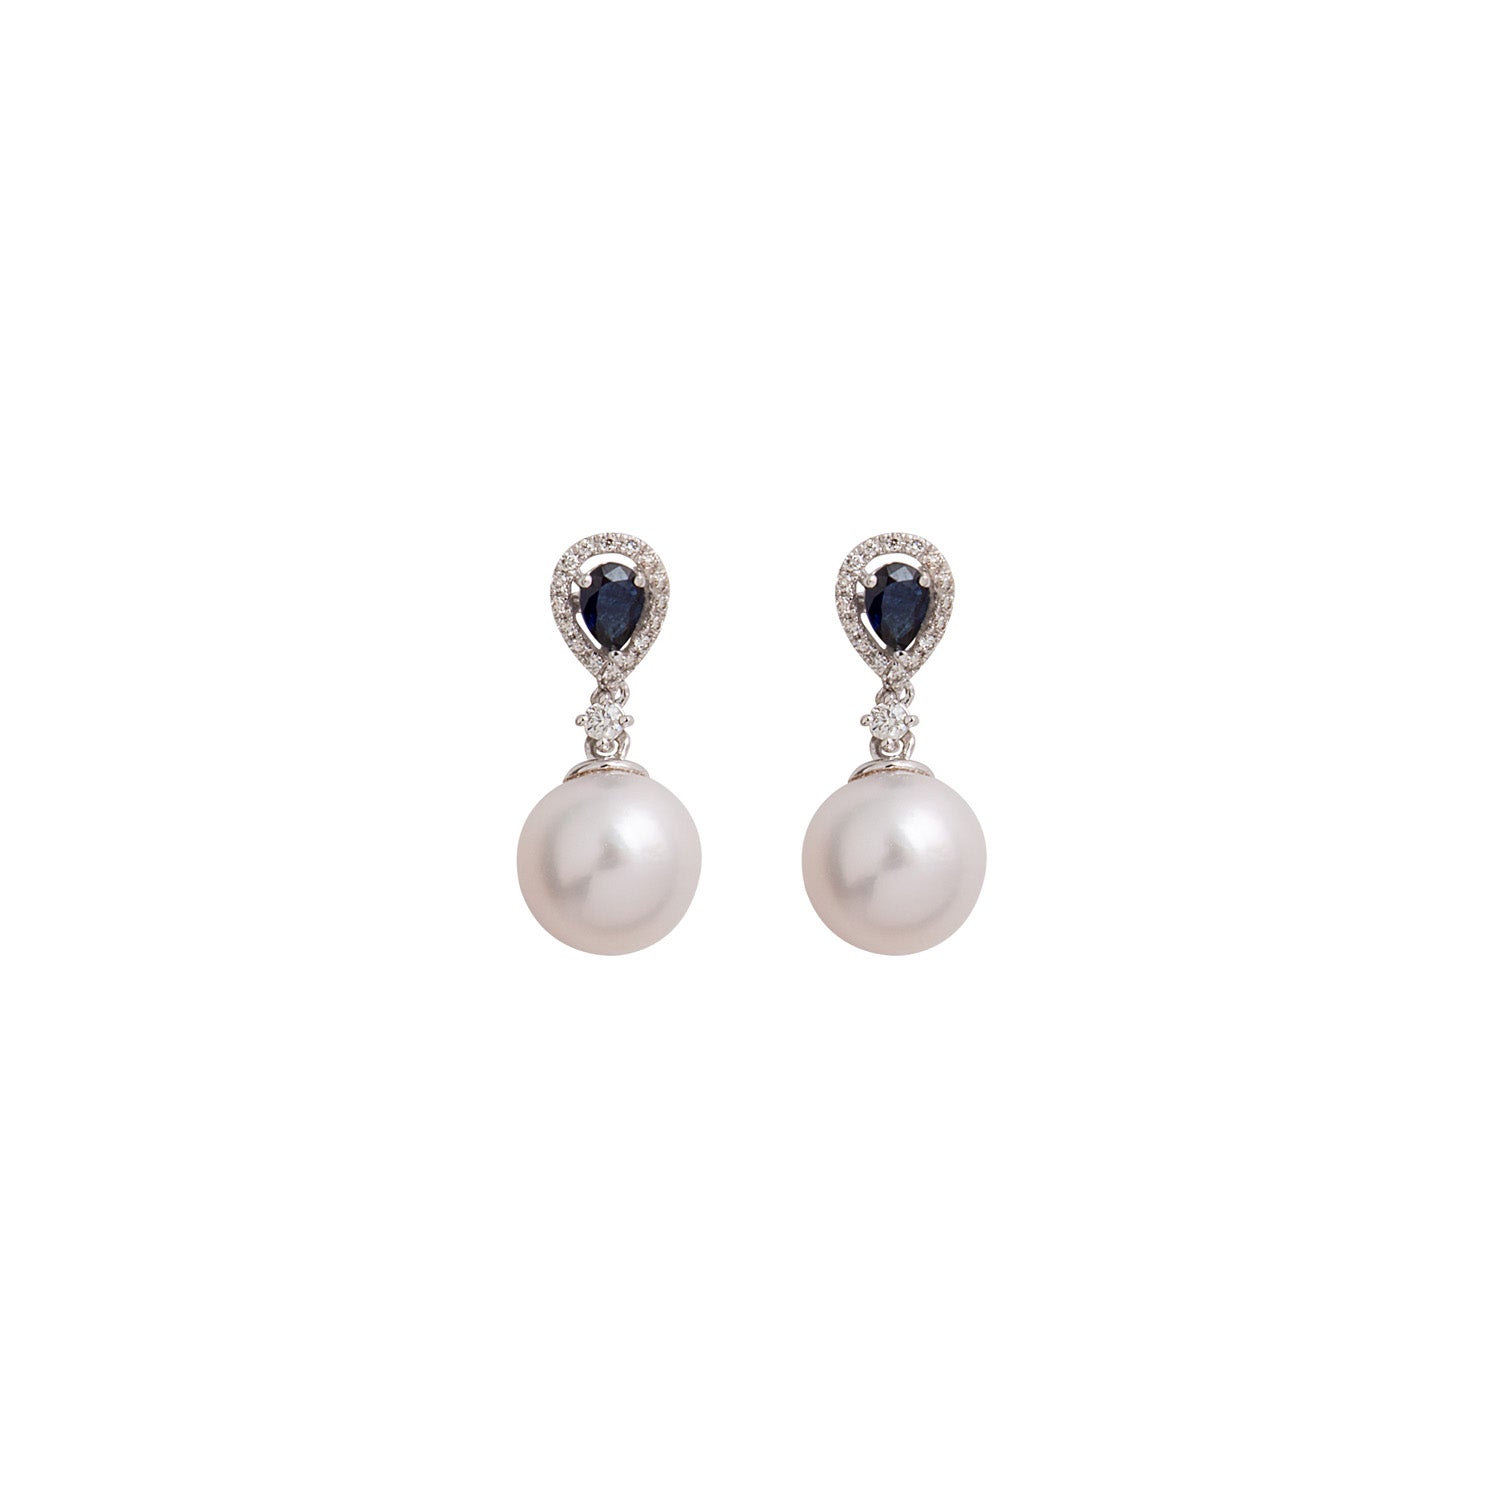 Pearl Earring. Earrings. 18K gold earring. Fresh water pearl. White Gold, yellow gold, rose gold. Perfect Gift. Earring gift. Hanging Pearl. Chain Erring. Fine jewelry. Anatol. Σκουλαρίκι χρυσό. Σκουλαρίκι  με μαργαριτάρι. Σκουλαρίκι αλυσίδα. Σκουλαρίκι με πέρλα. Athens. Blue sapphire earring. Pearls and sapphires.